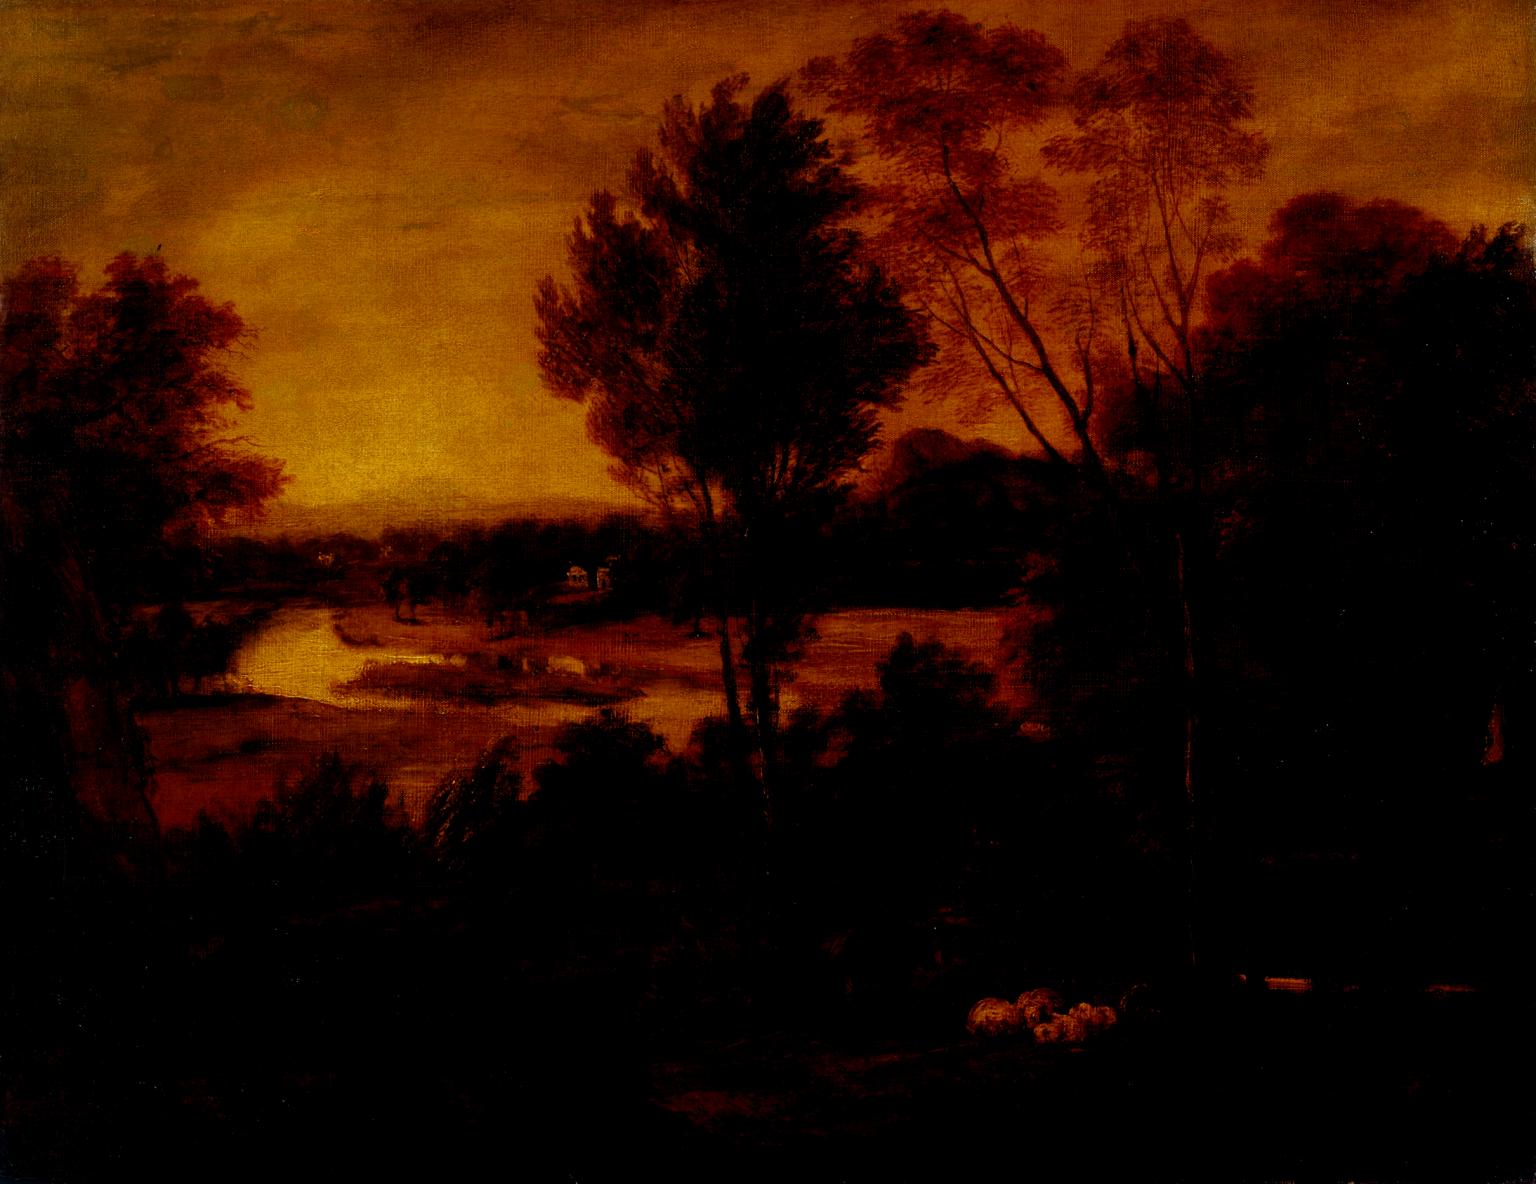 1788, oil on canvas, 69.8 × 90.8 cm. Tate, London (N05635). Mannings no. 2189. This image represents the exact object shown at the British Institution loan exhibition of 1823 as cat. no 6, <i>Landscape: View from Richmond Hill</i>